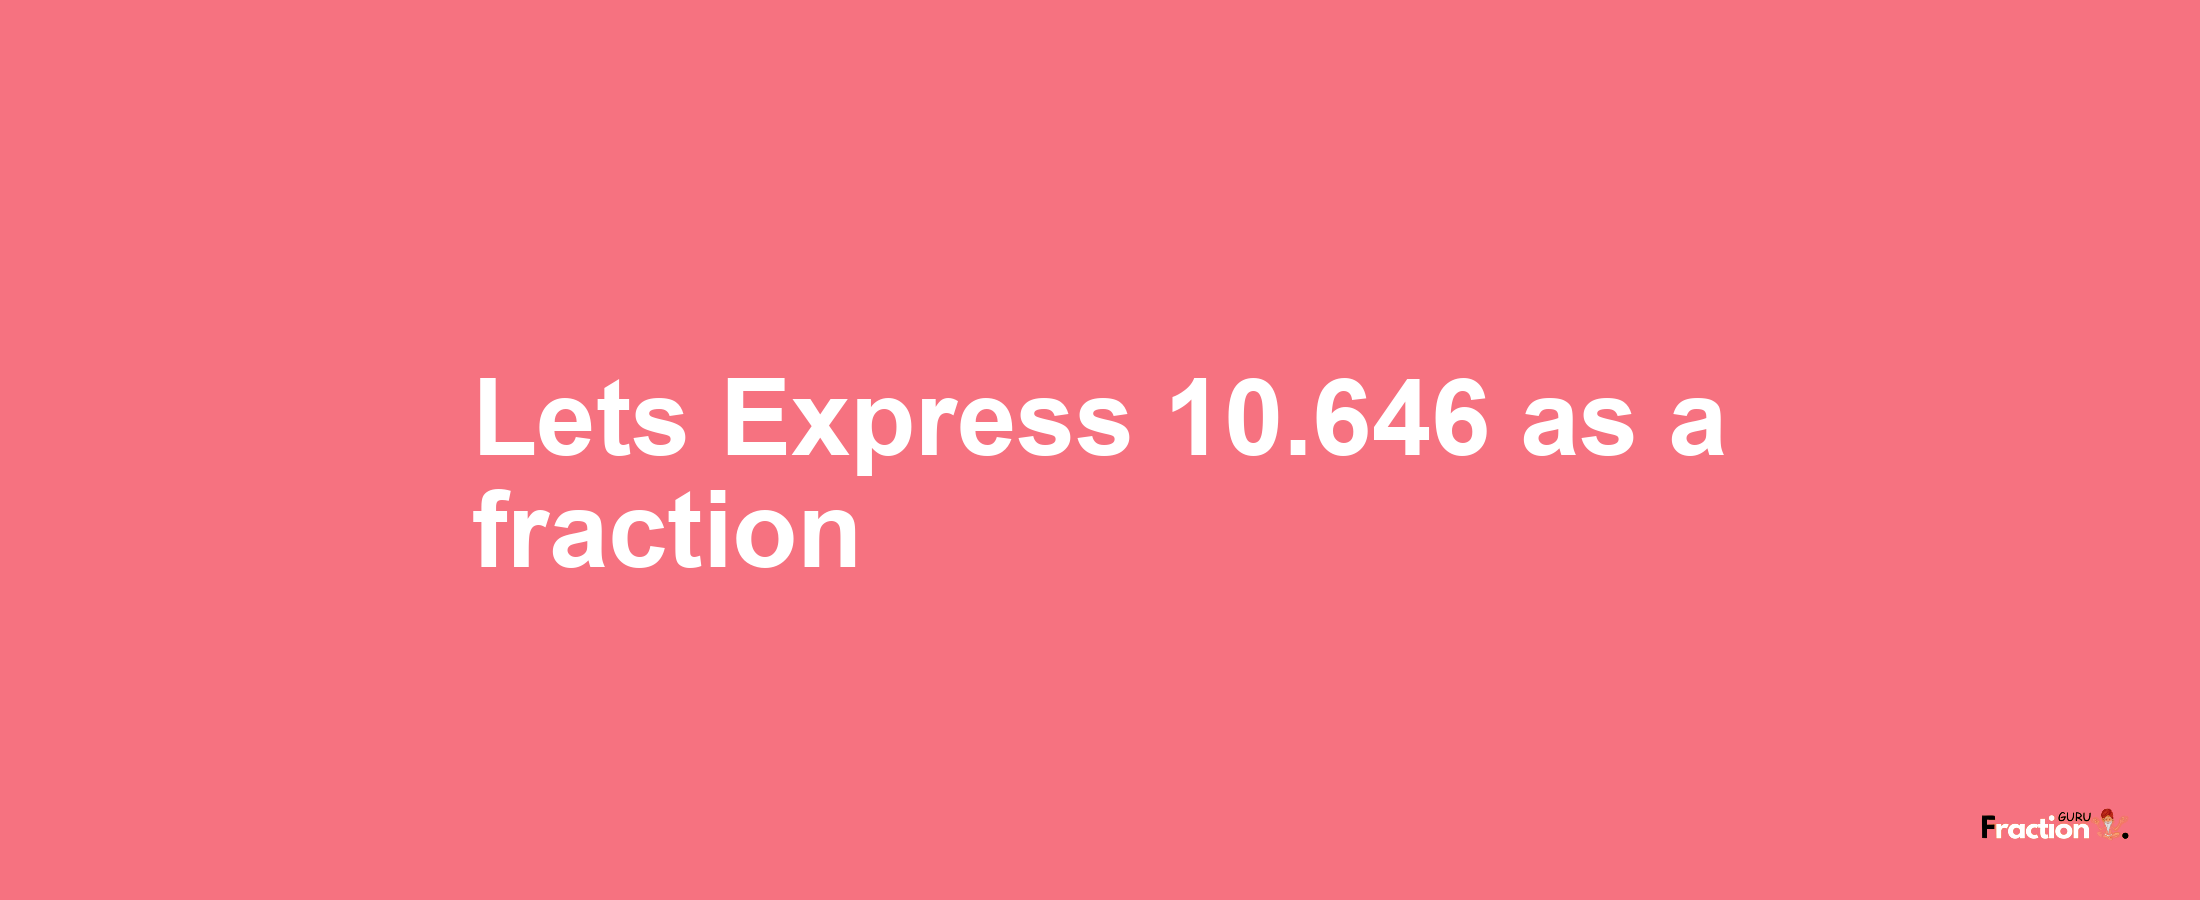 Lets Express 10.646 as afraction